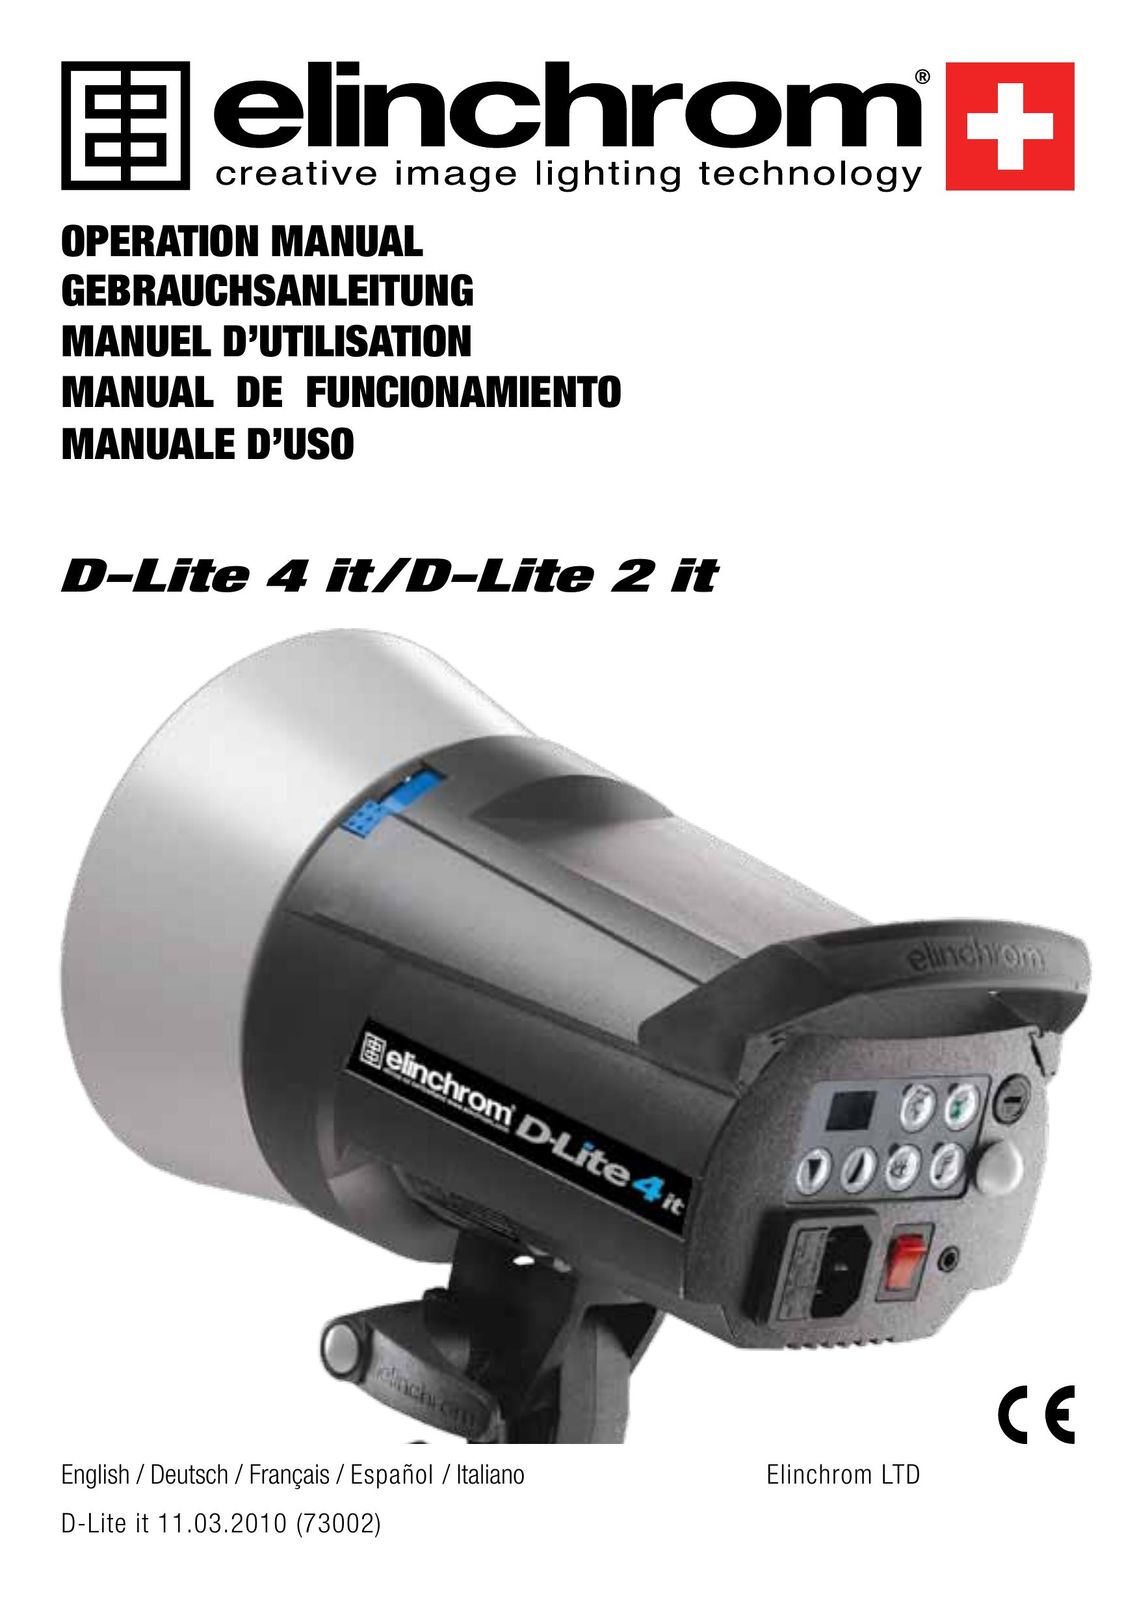 Elinchrom 4 IT Home Safety Product User Manual